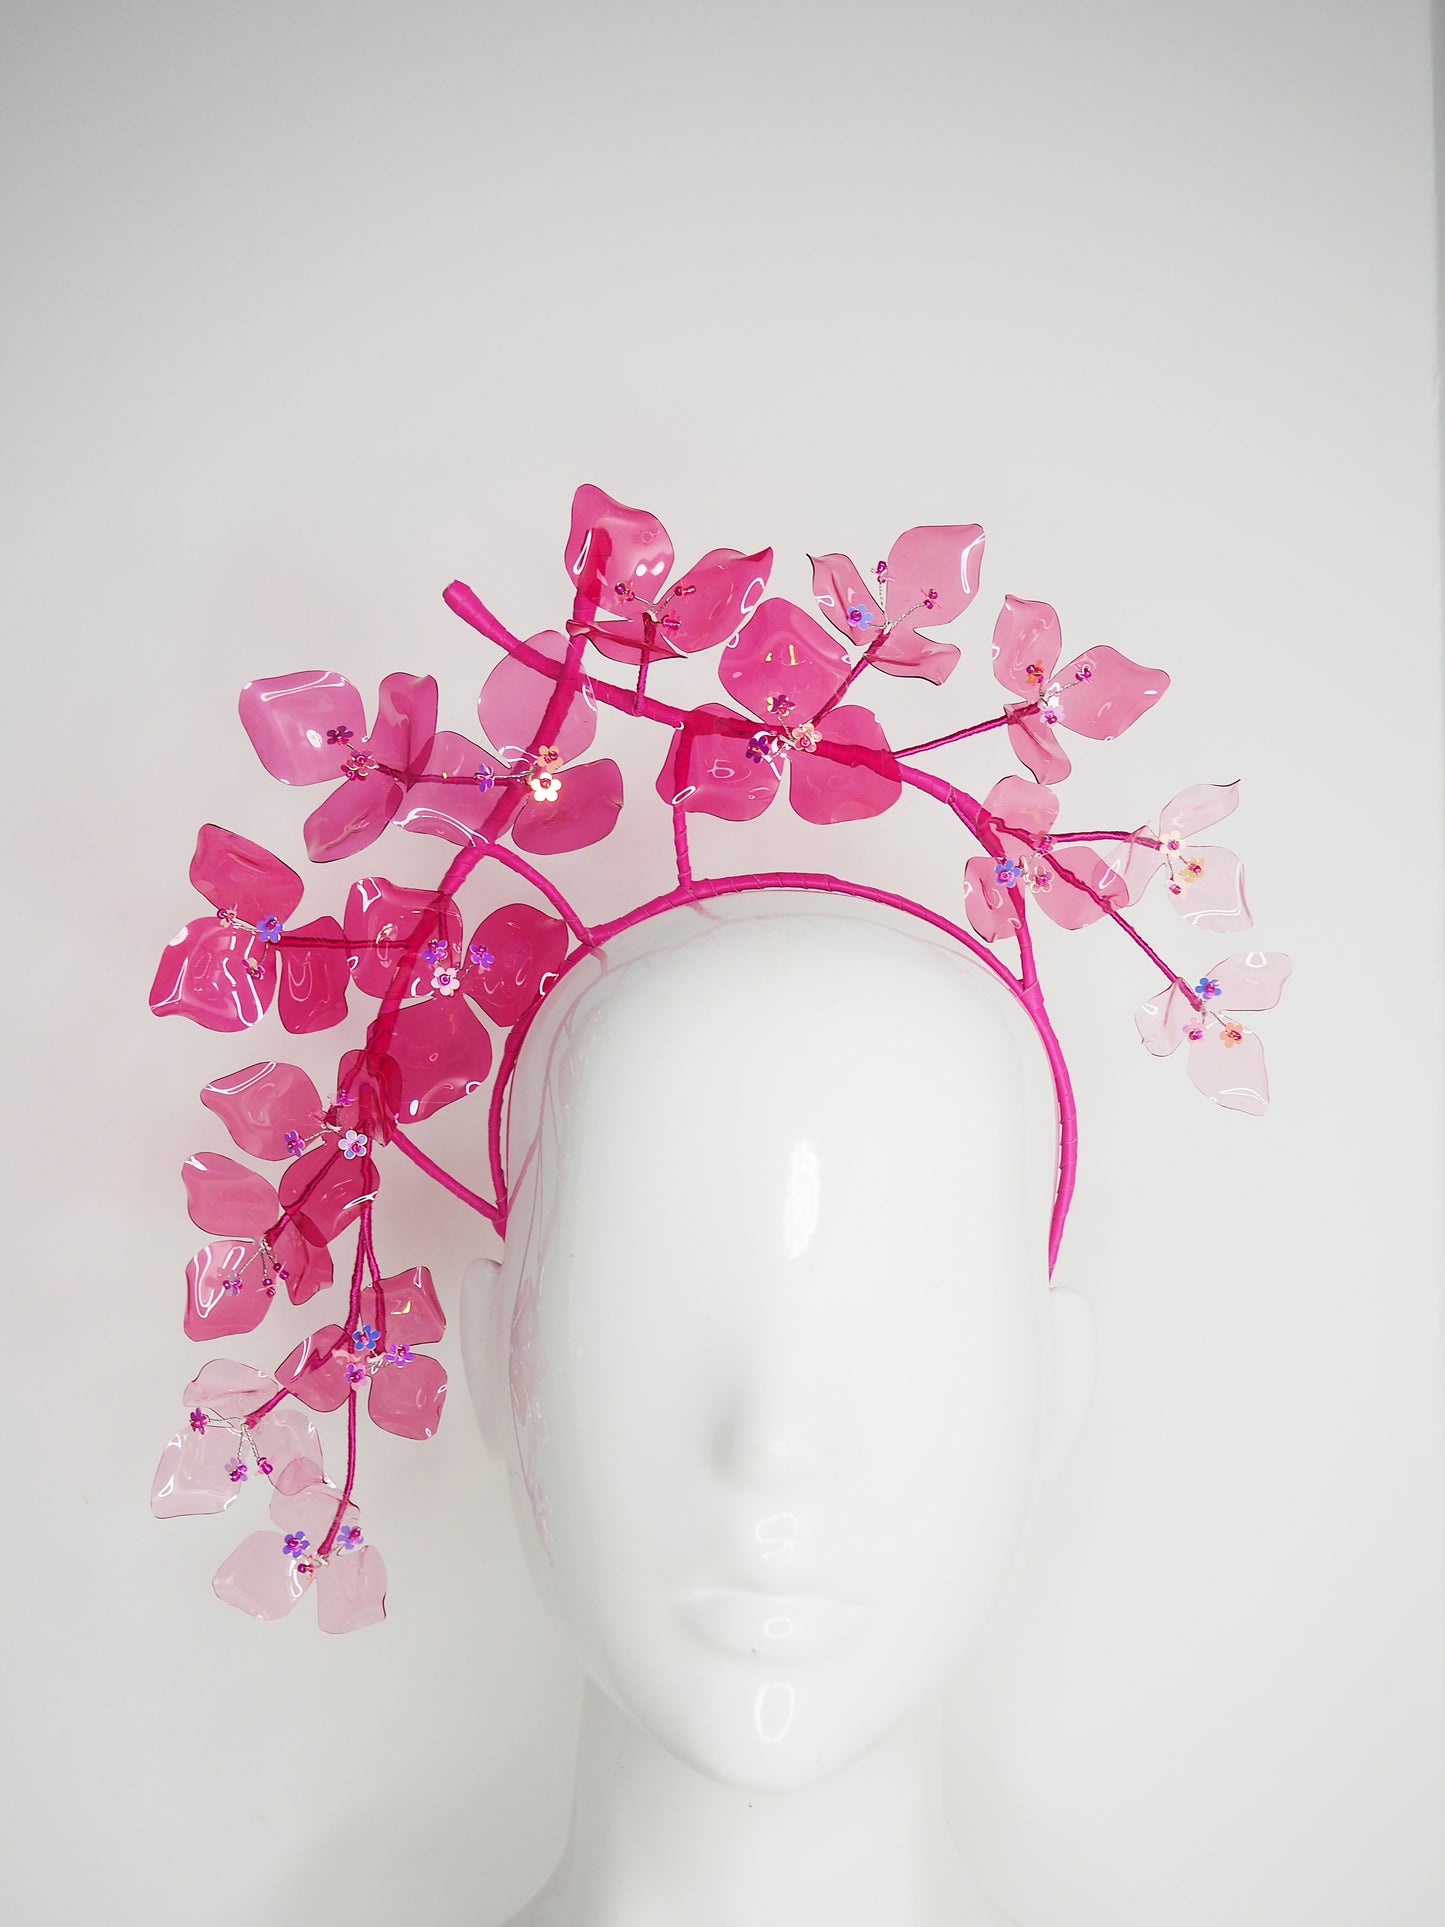 Bouganvillea Bliss - Ombre crystoform bouganvillea vine is shades of pink with leather vine